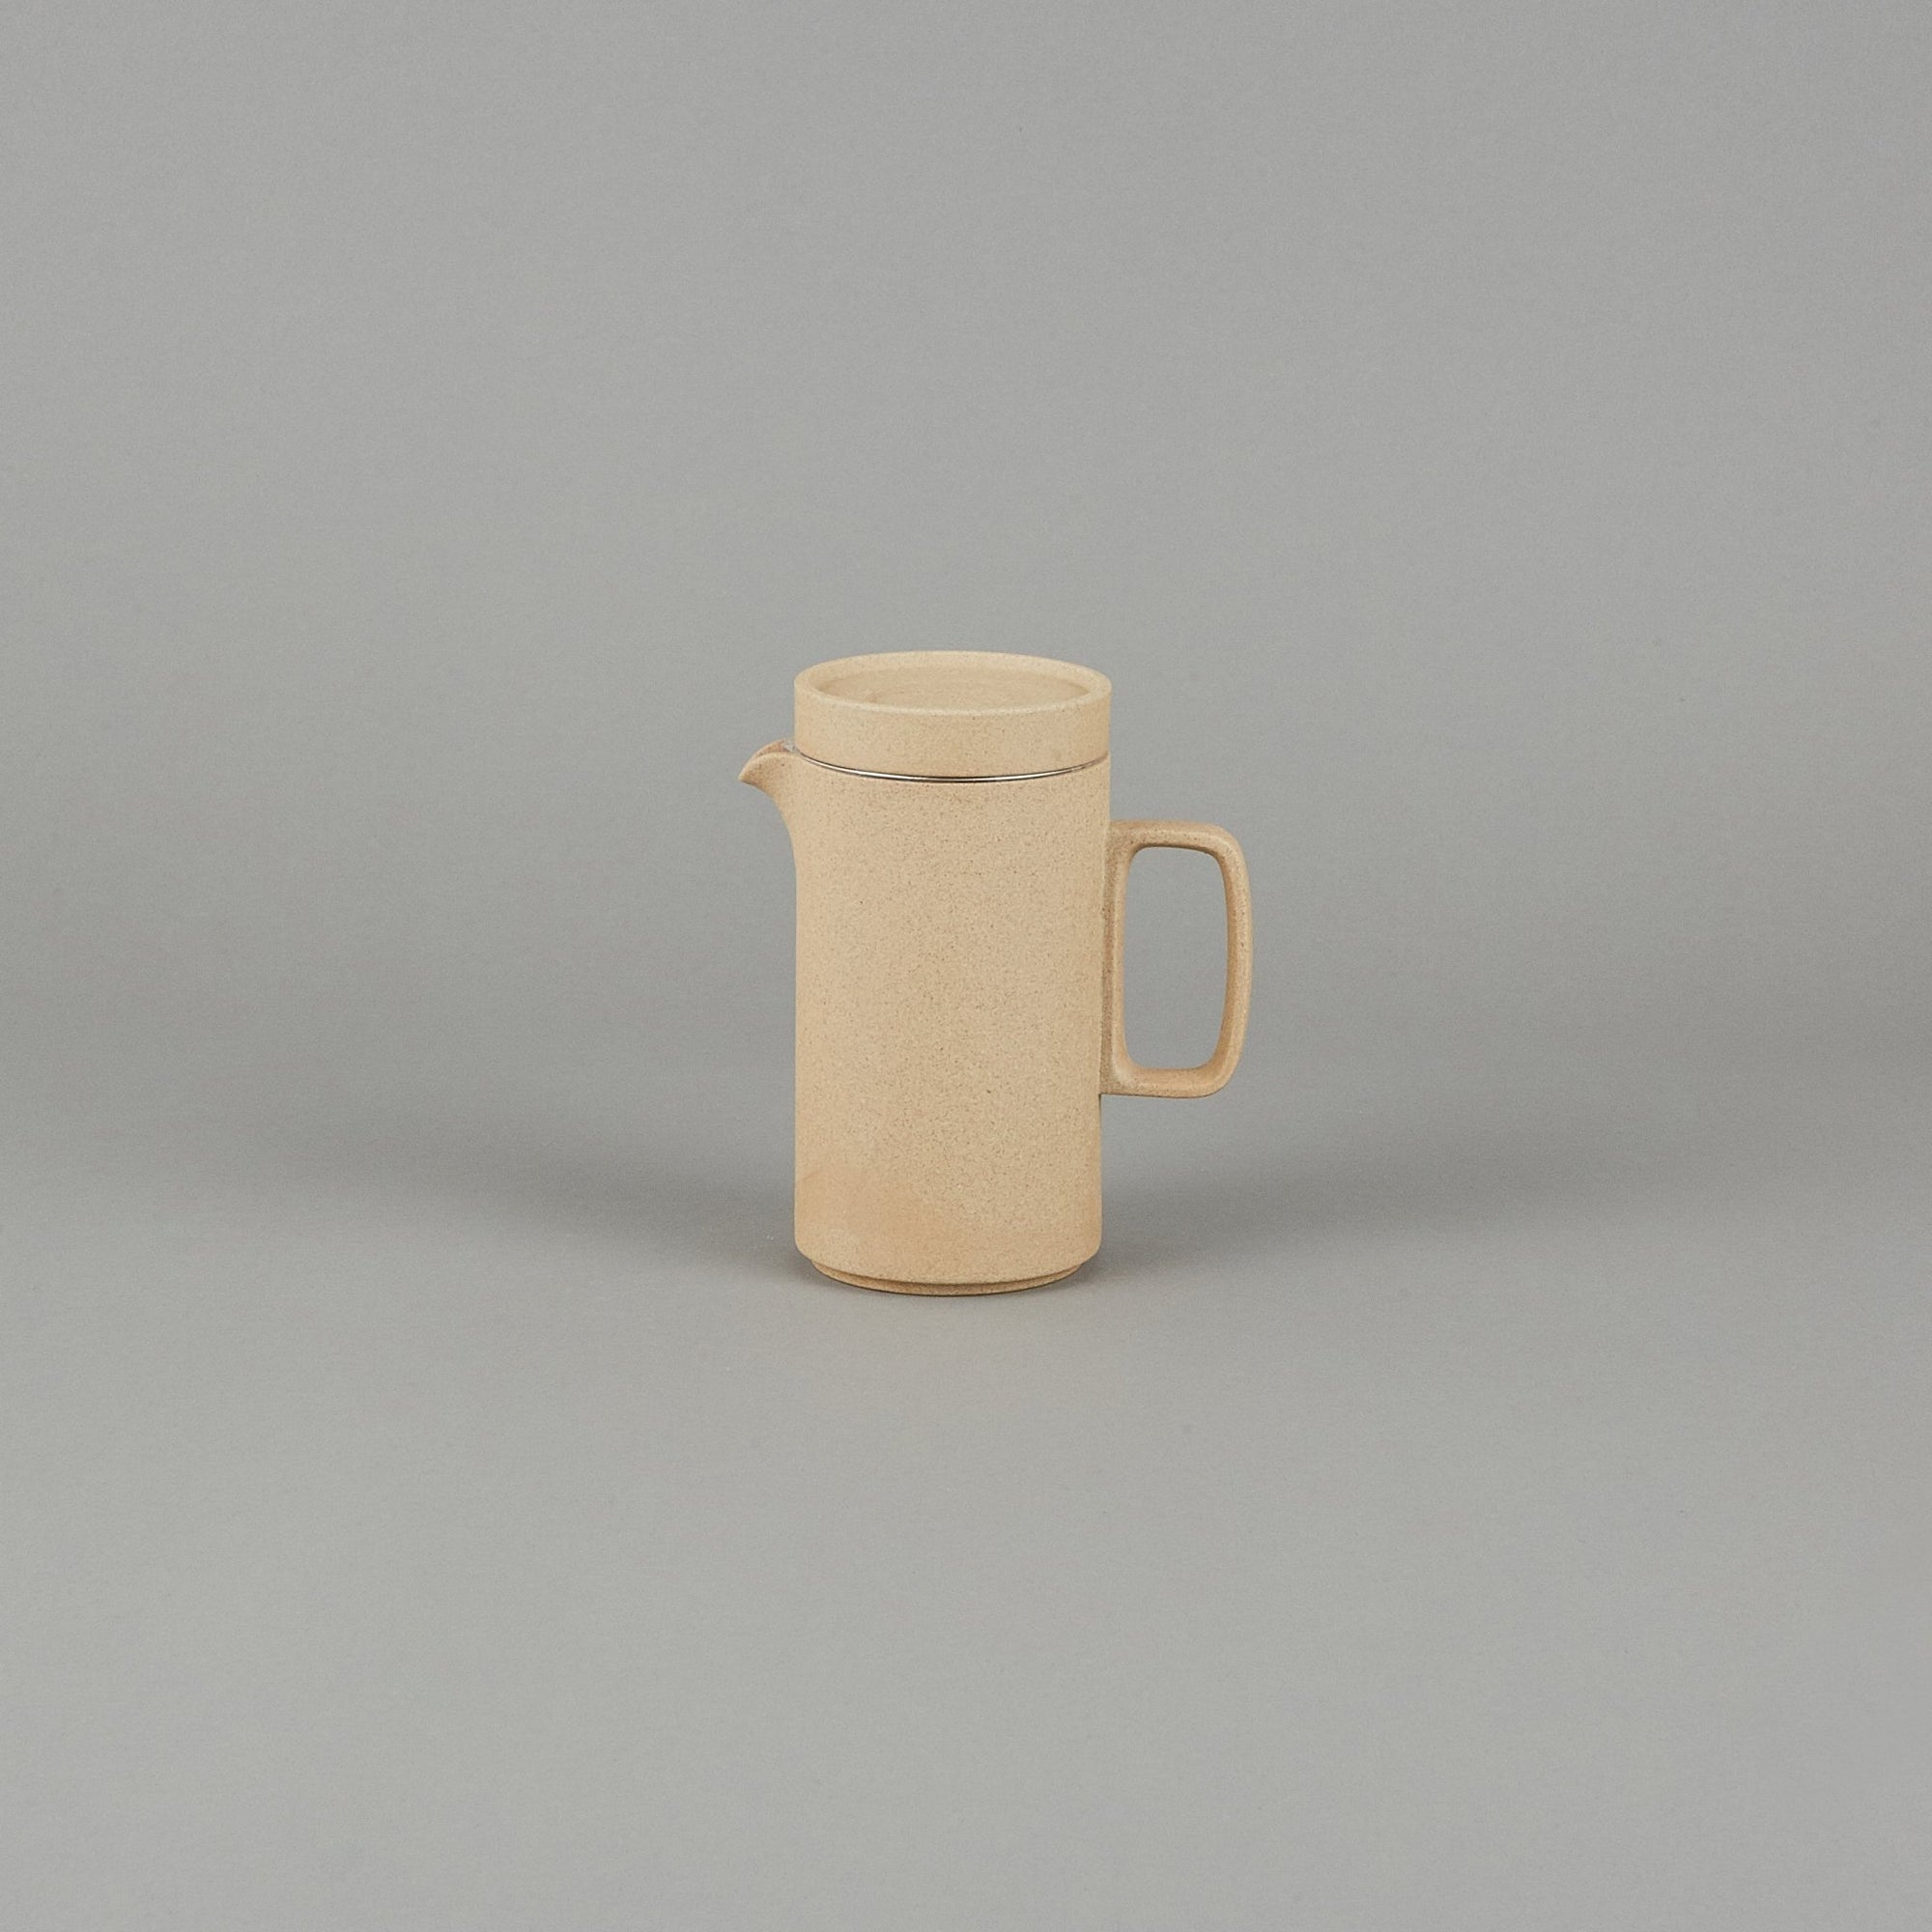 Hasami Porcelain - Teapot Tall with Stainless Strainer Natural ø 3.3/8" | Tortoise General Store